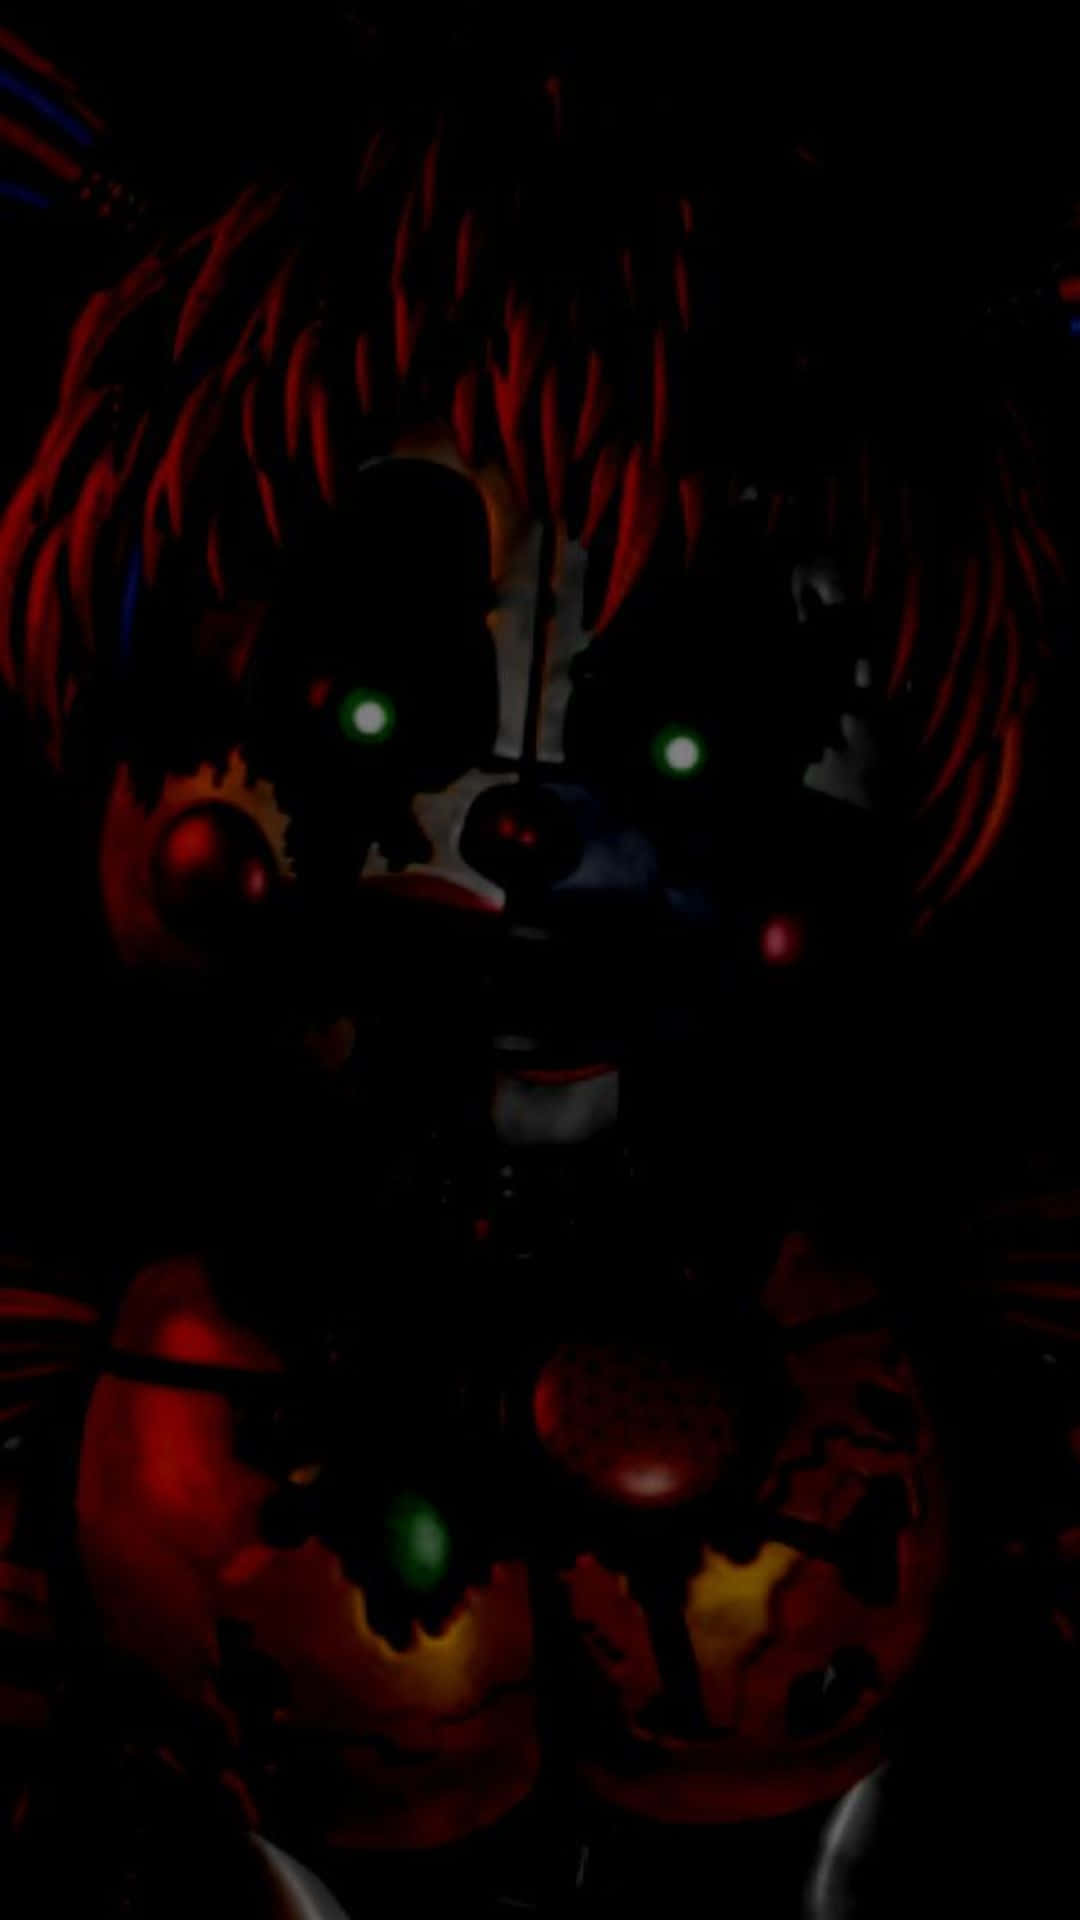 Caption: Intense Stare from the Sinister Animatronics of Scary FNAF Wallpaper